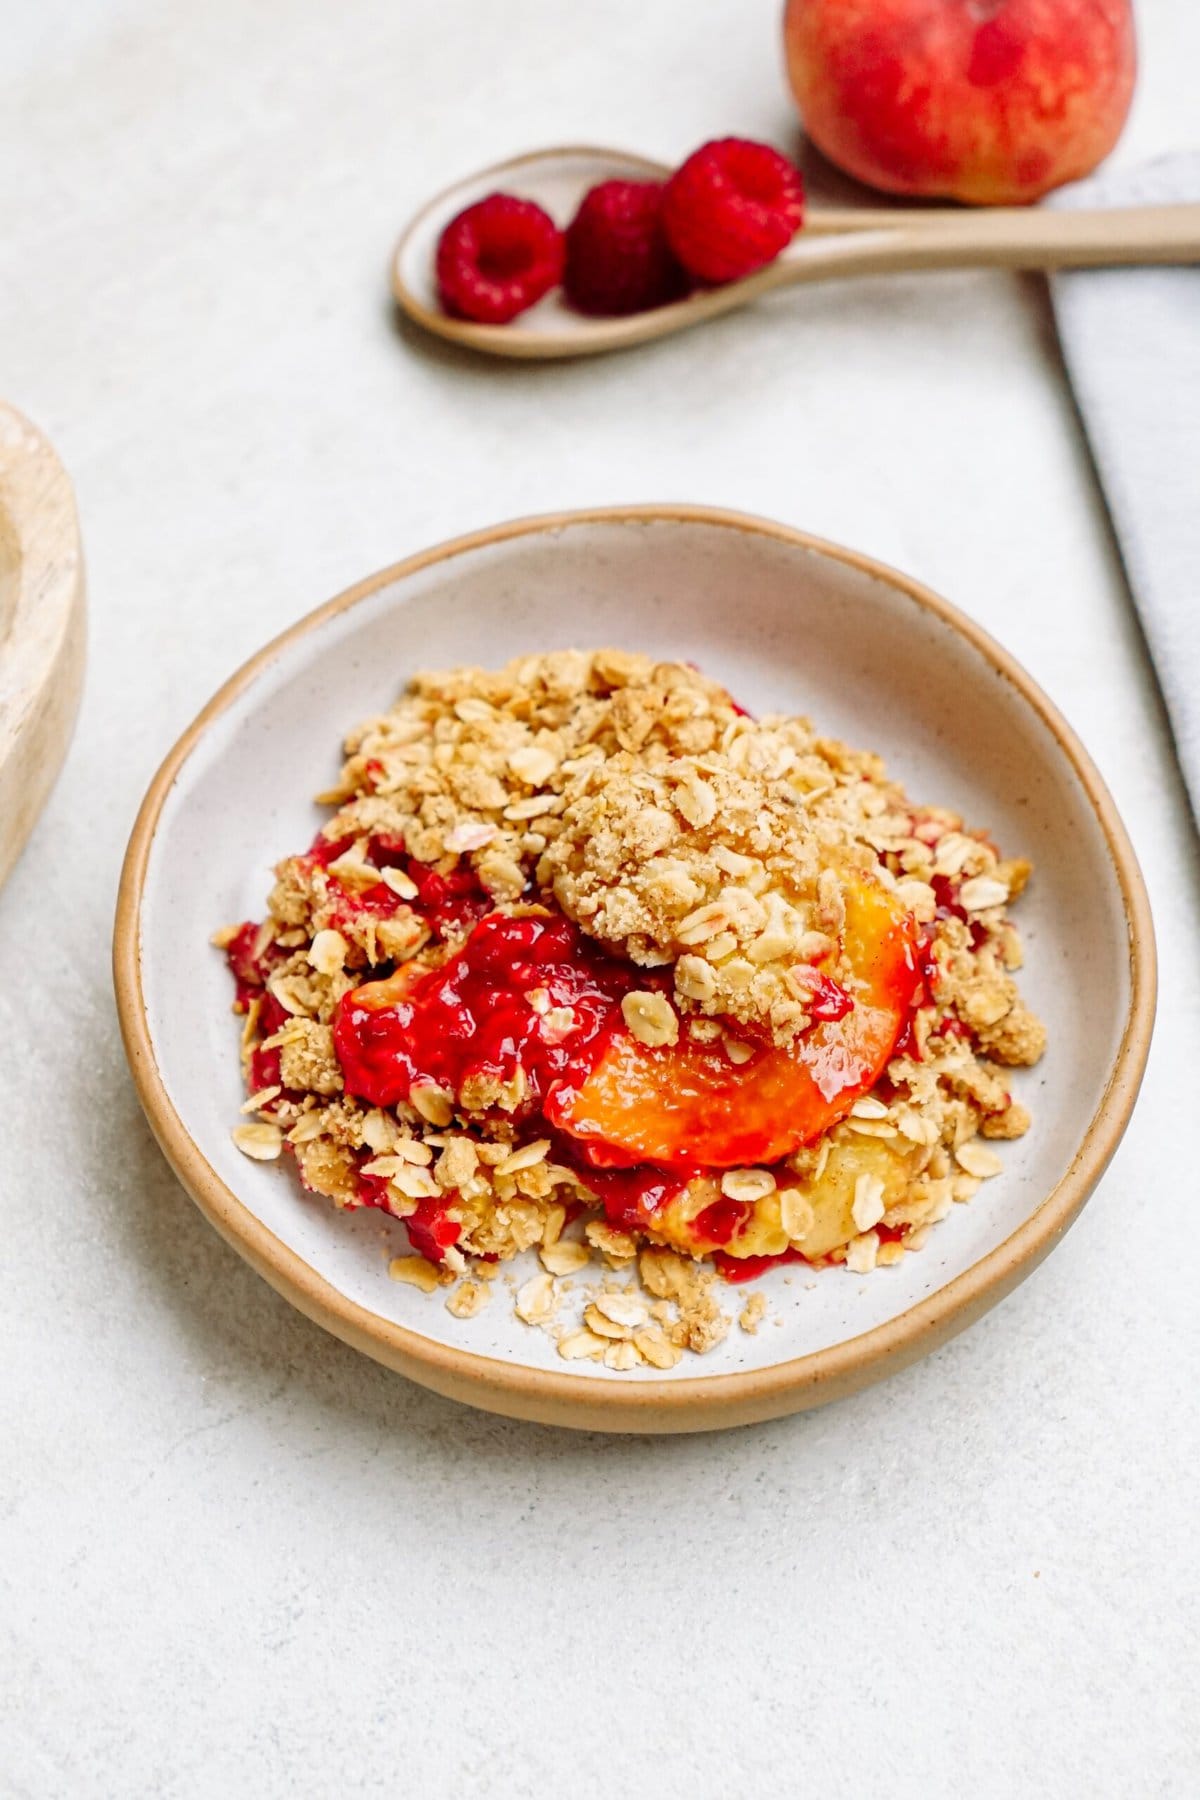 A bowl of raspberry cobbler topped with a crumbly oat mixture on a white plate. A wooden spoon with raspberries and a peach are in the background.